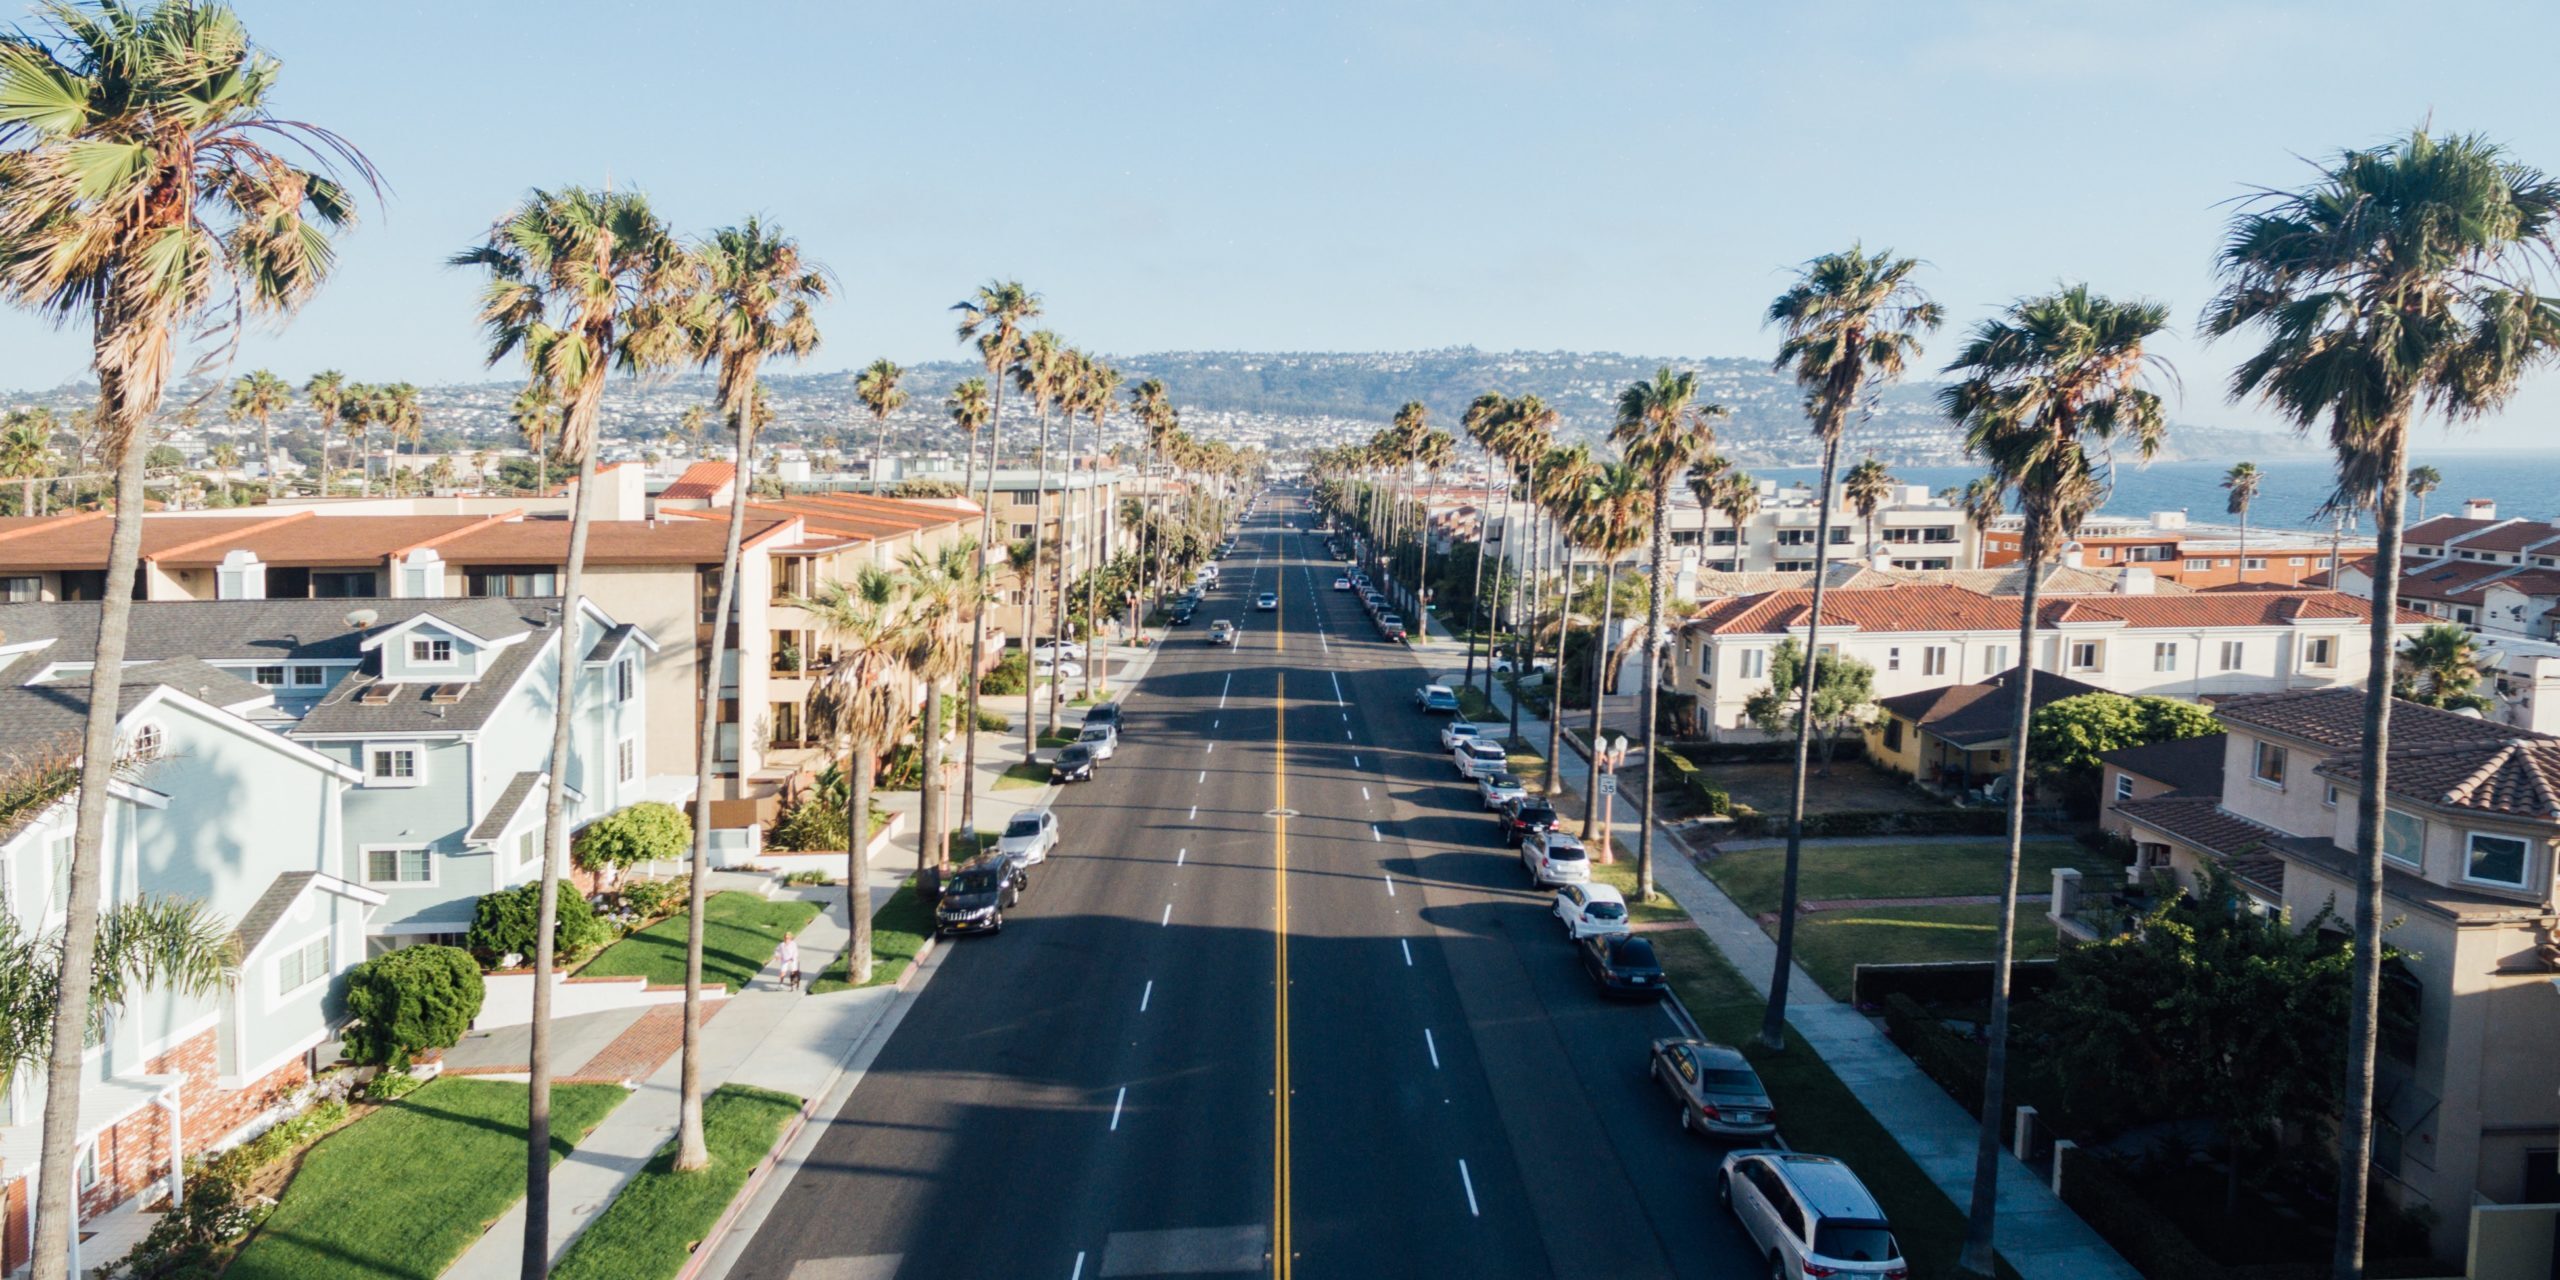 TurboTenant Report: The Best Places to Buy Rental Investment Property in California